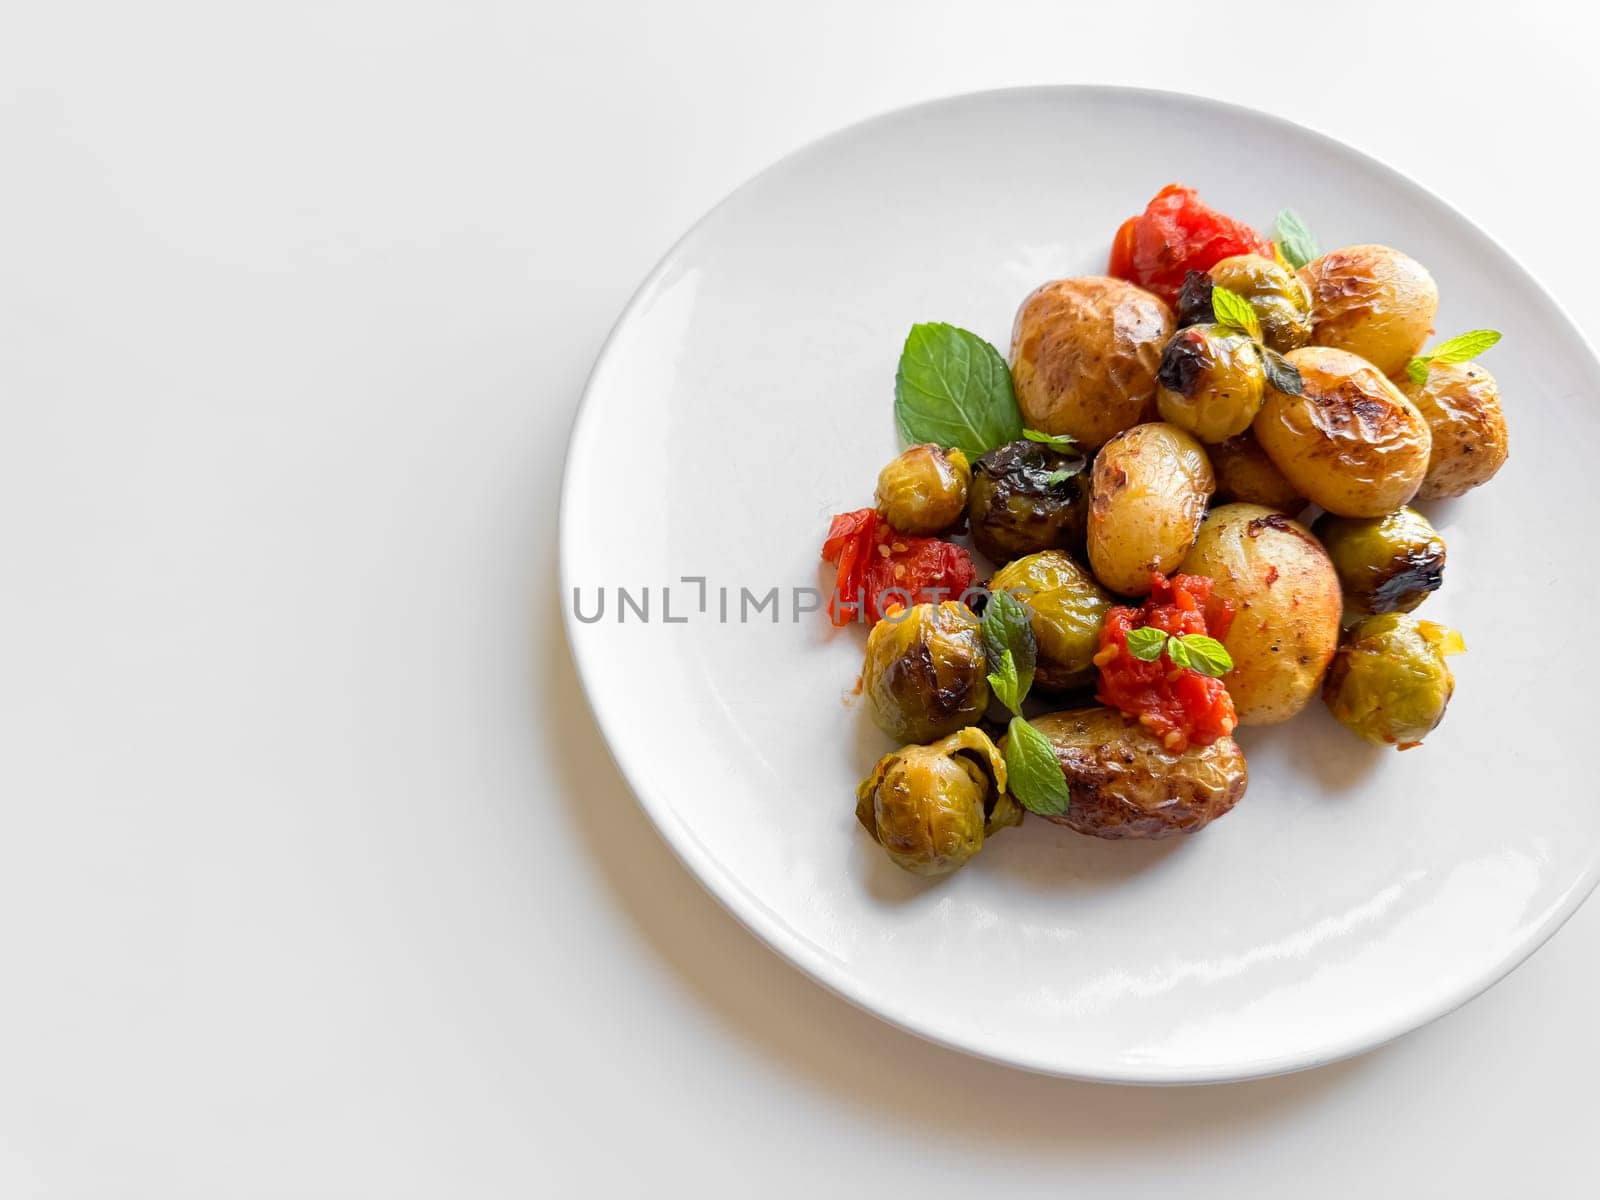 Roasted baby potatoes and Brussels sprouts with cherry tomatoes on white plate, garnished with basil, healthy vegetarian dish concept with space for text. High quality photo